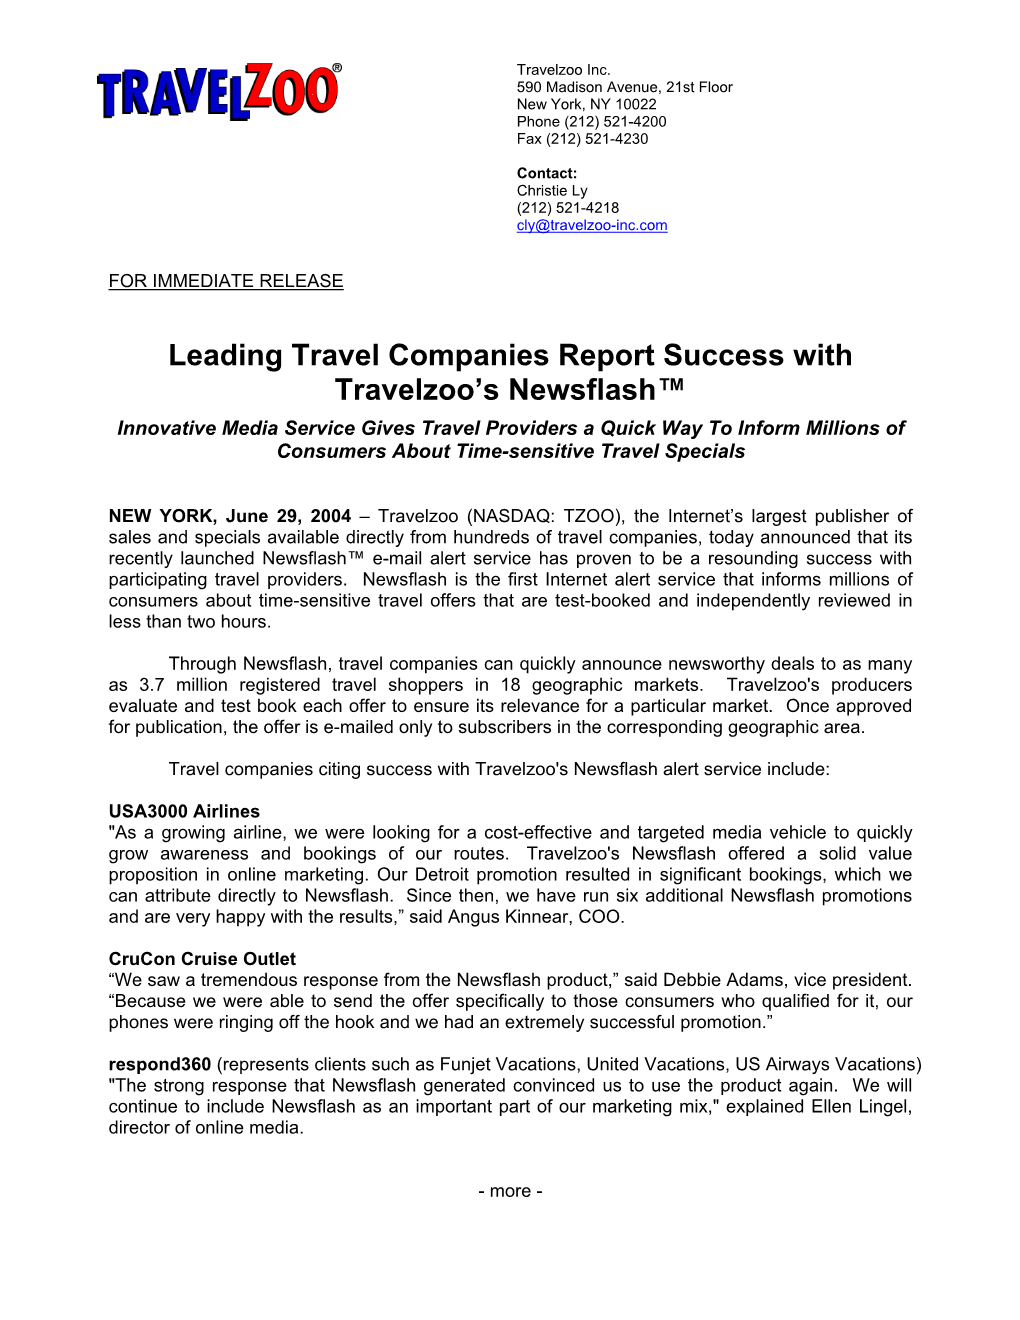 Leading Travel Companies Report Success with Travelzoo's Newsflash